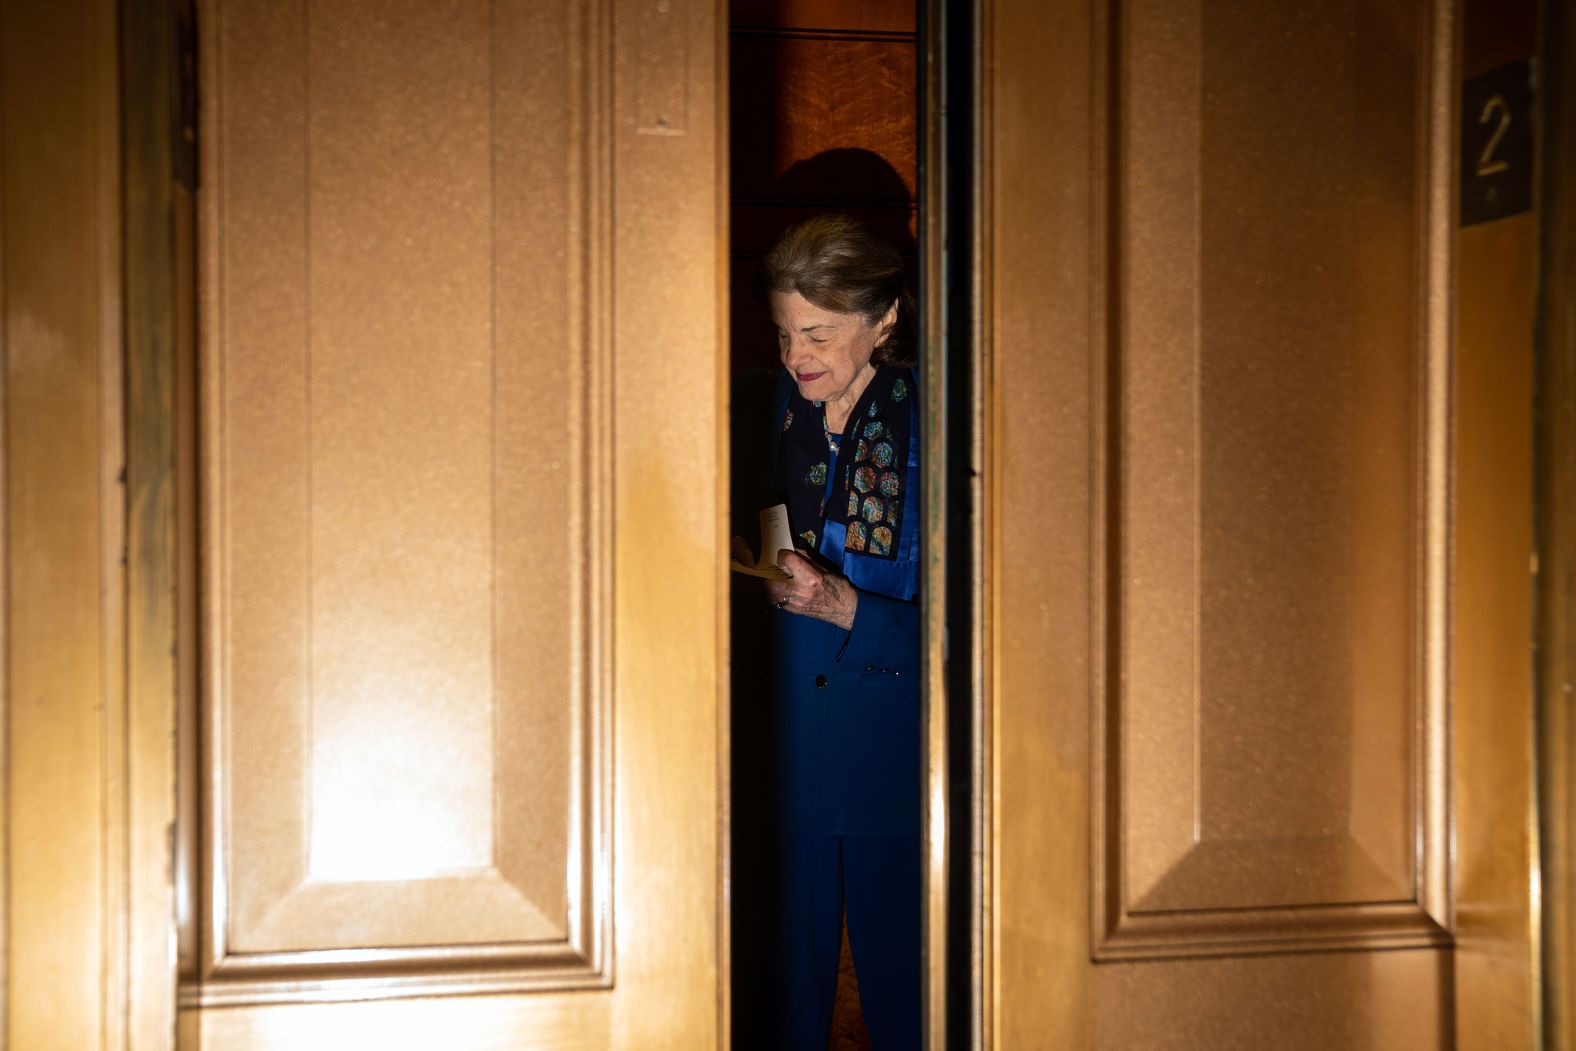 Feinstein leaves the Senate Chamber following a vote in 2023. She announced she would not run for reelection, marking the end to one of the most storied political careers.